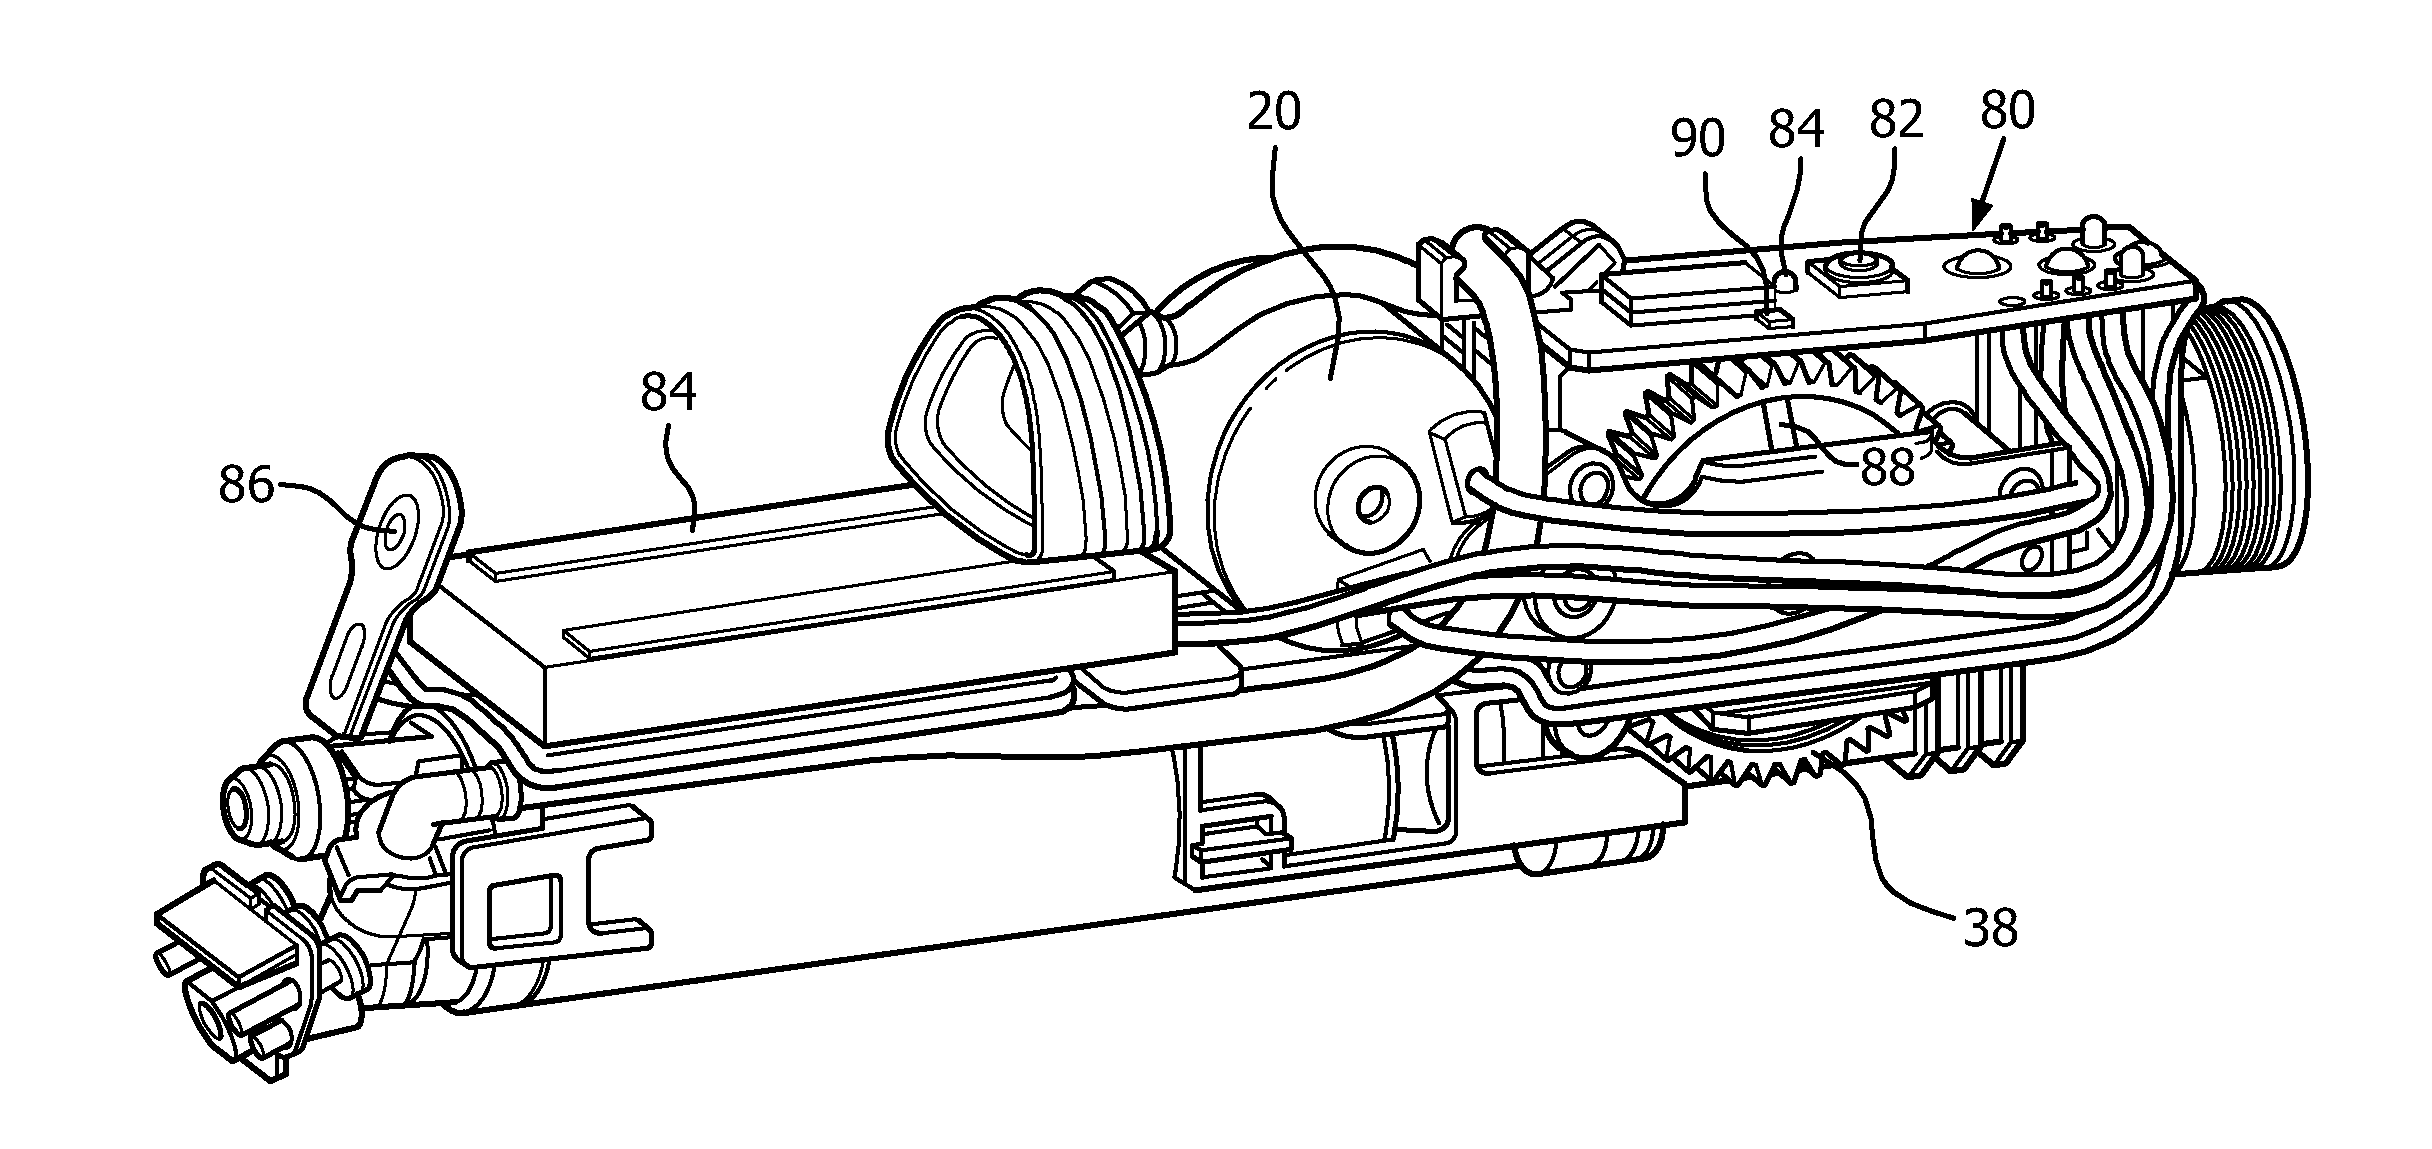 Oral care appliance using pulsed fluid flow